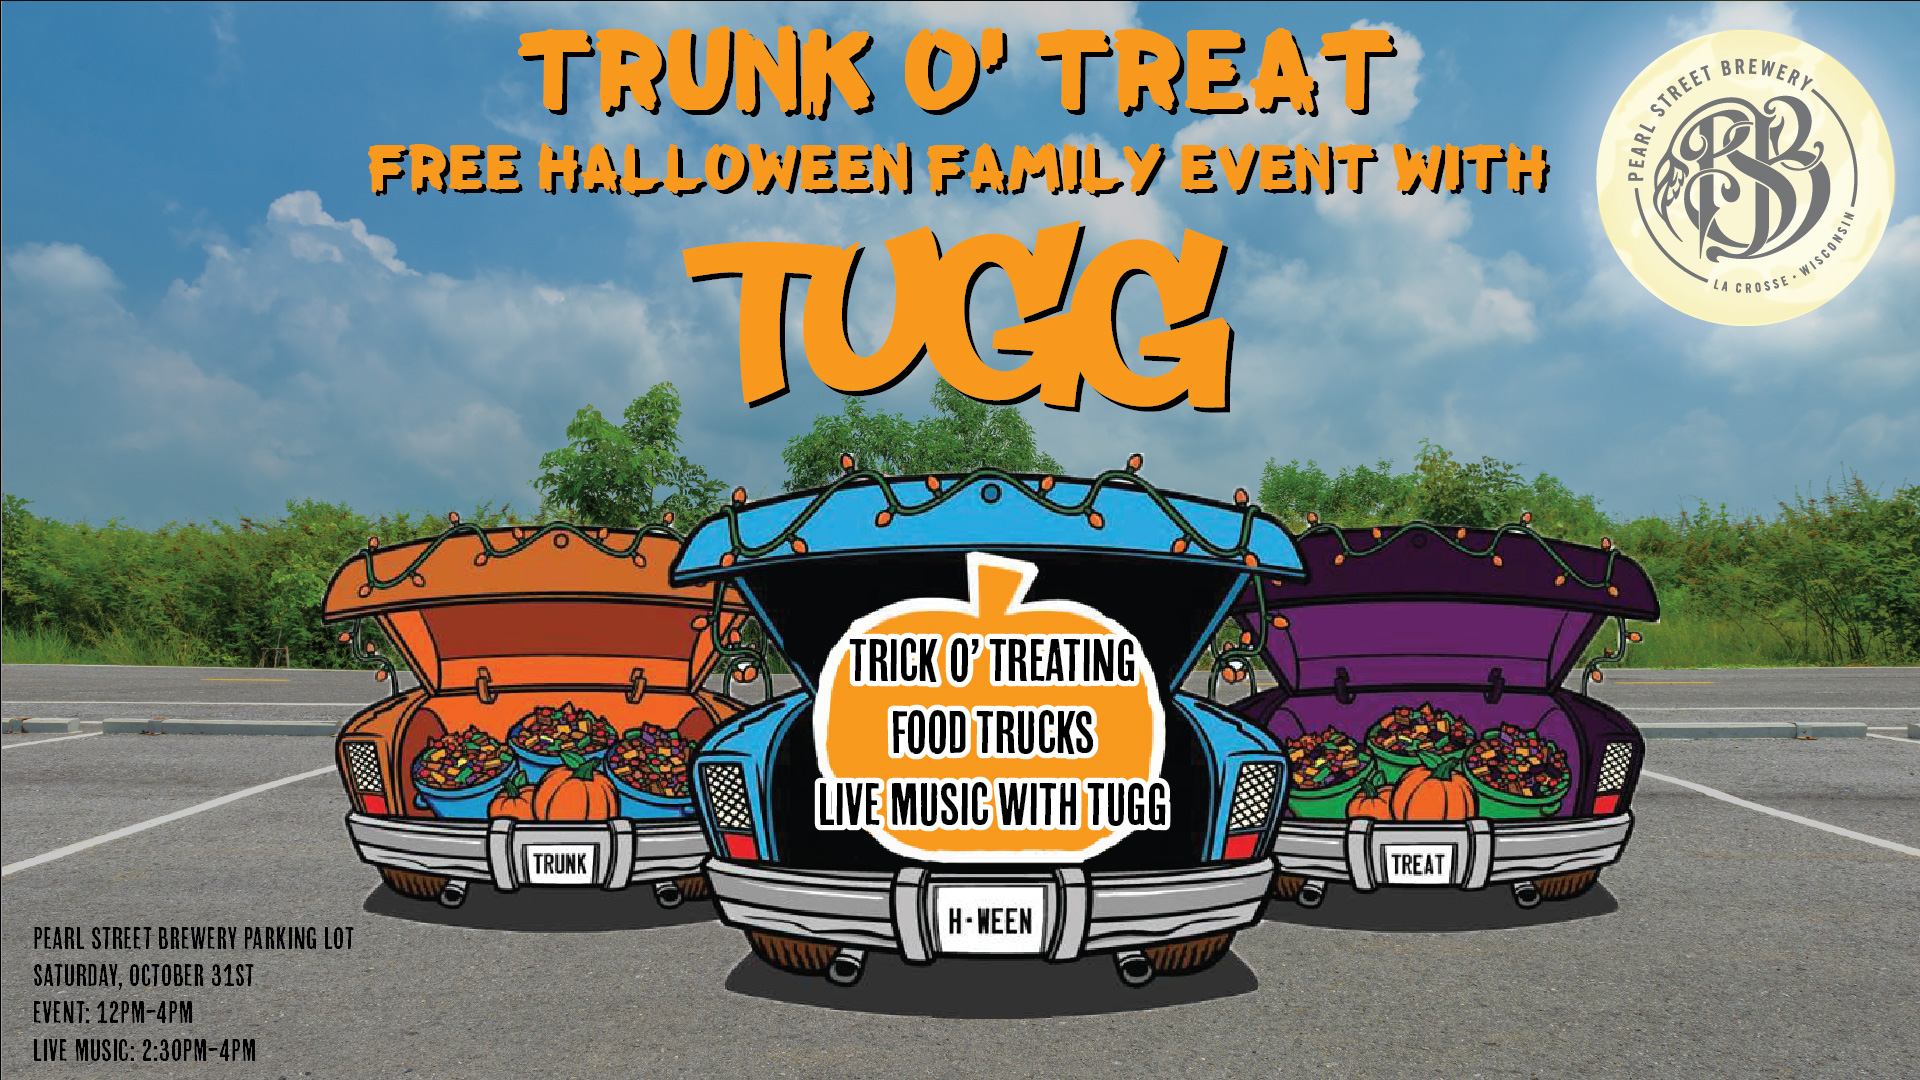 Pearl Street Brewery has Announced TUGG's Trunk O’ Treat Family Halloween taking place in the Pearl Street Brewery Parking lot...